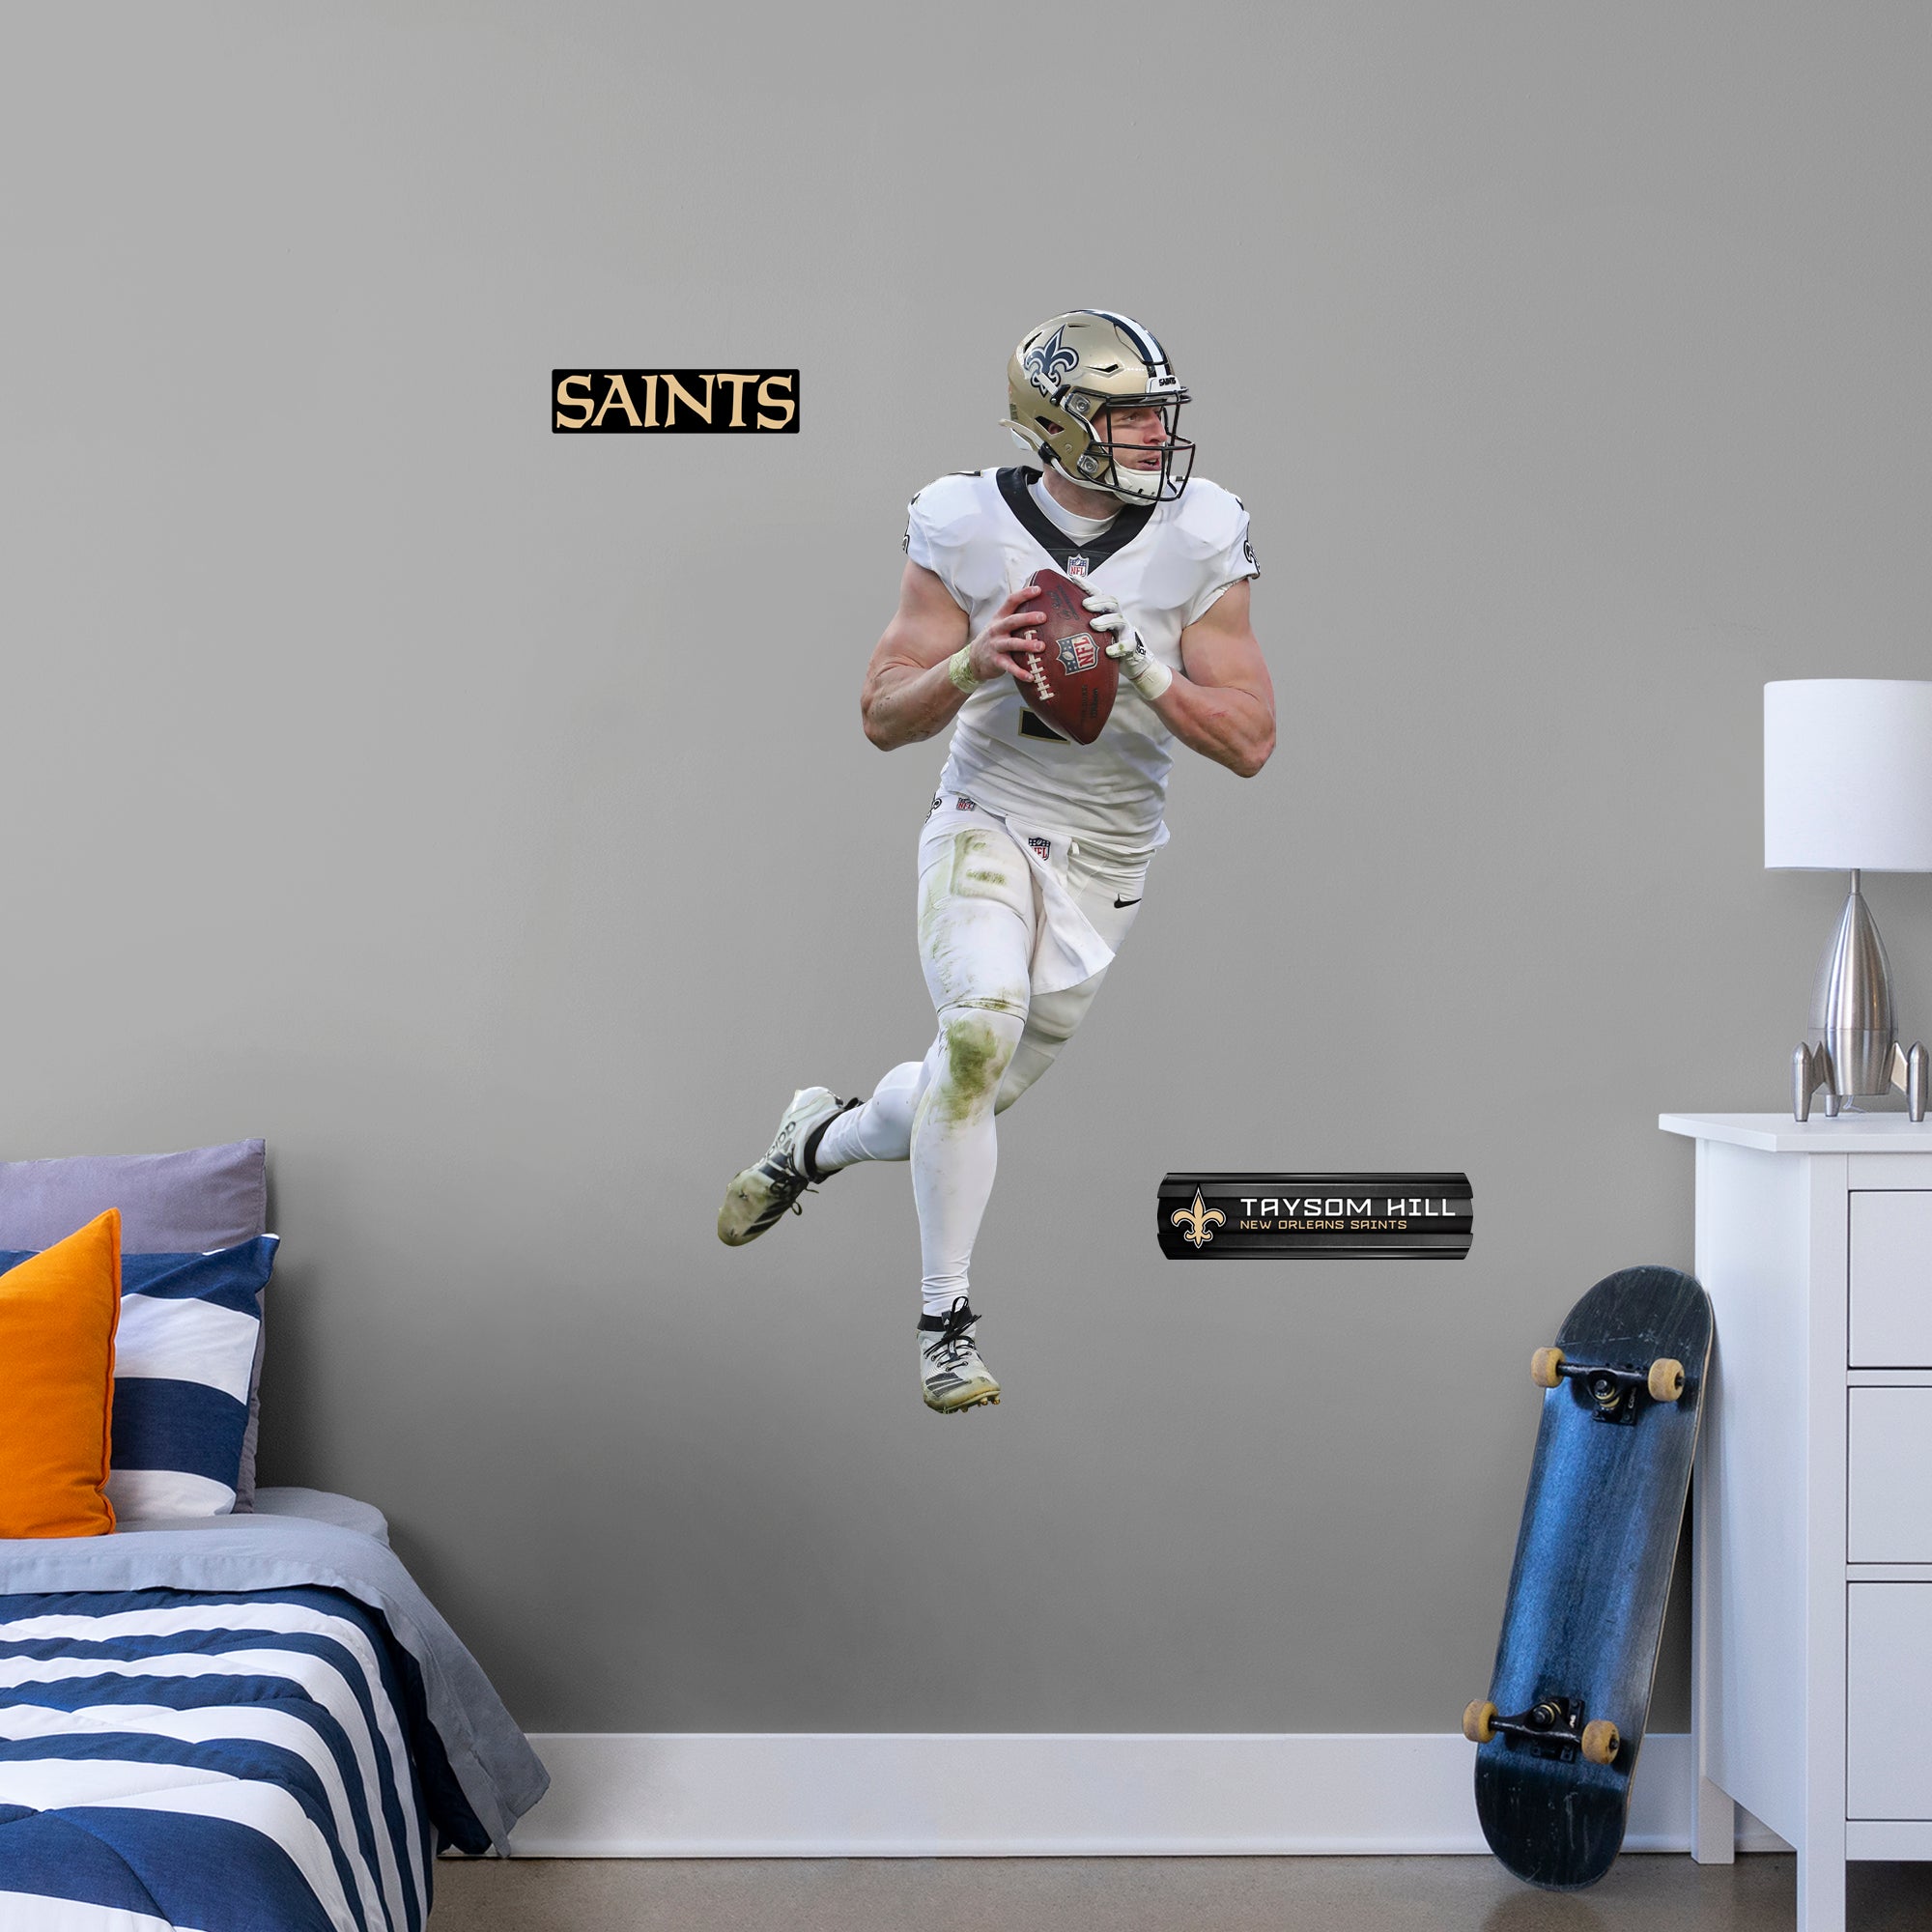 Taysom Hill 2021 - Officially Licensed NFL Removable Wall Decal Giant Athlete + 2 Decals (26"W x 51"H) by Fathead | Vinyl